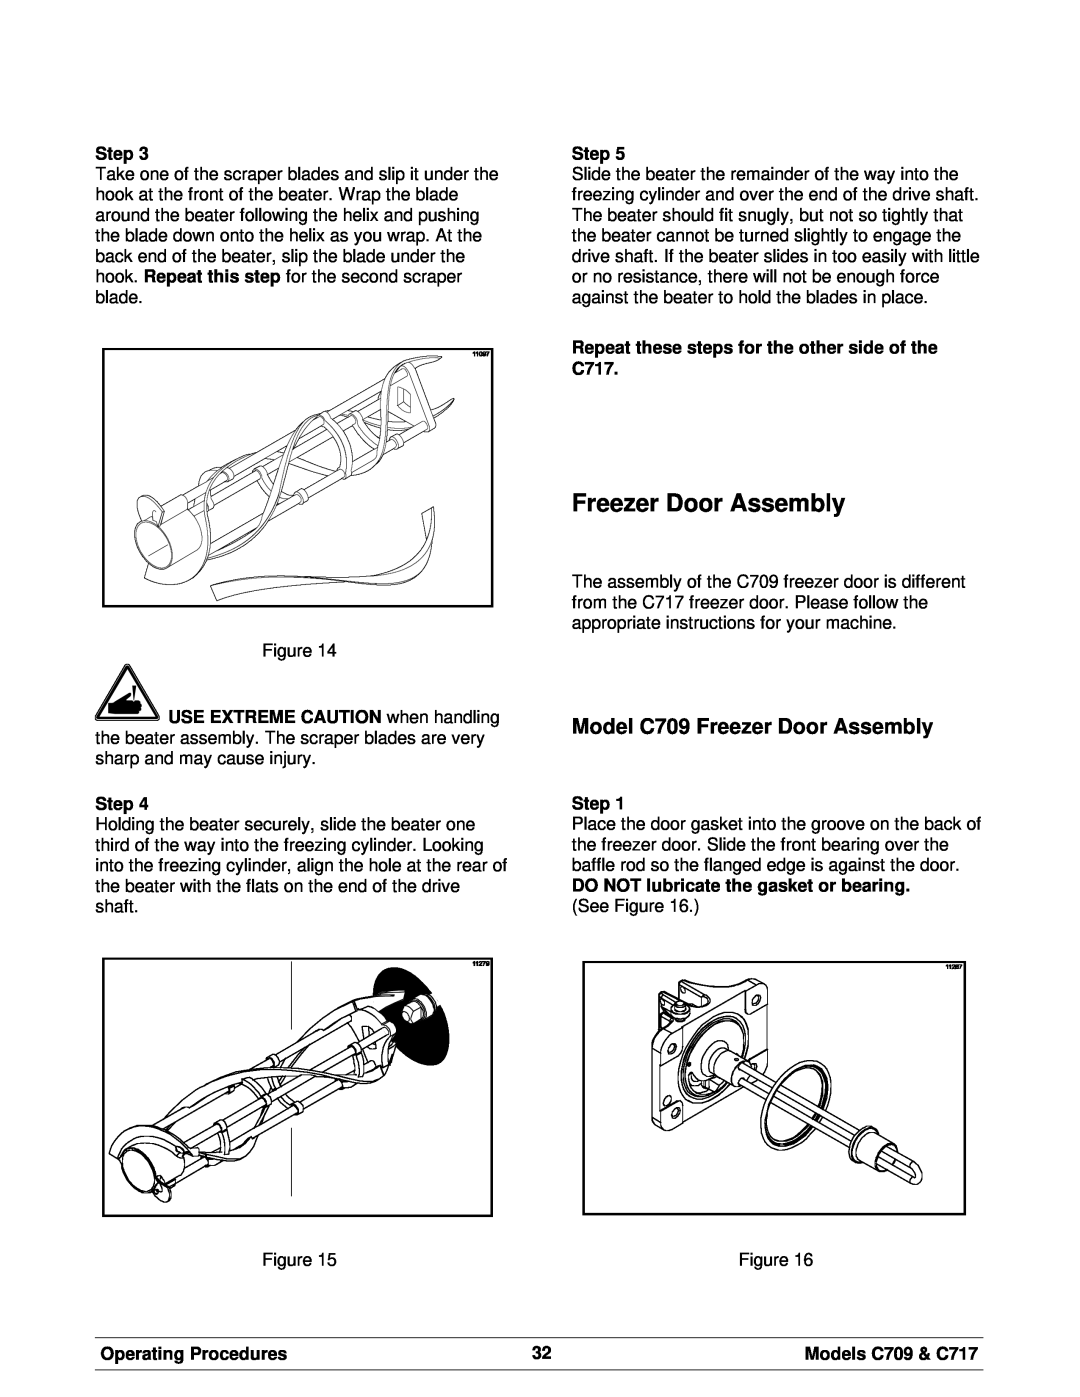 Taylor C709 manual Freezer Door Assembly, Step, Repeat these steps for the other side of the C717, Operating Procedures 